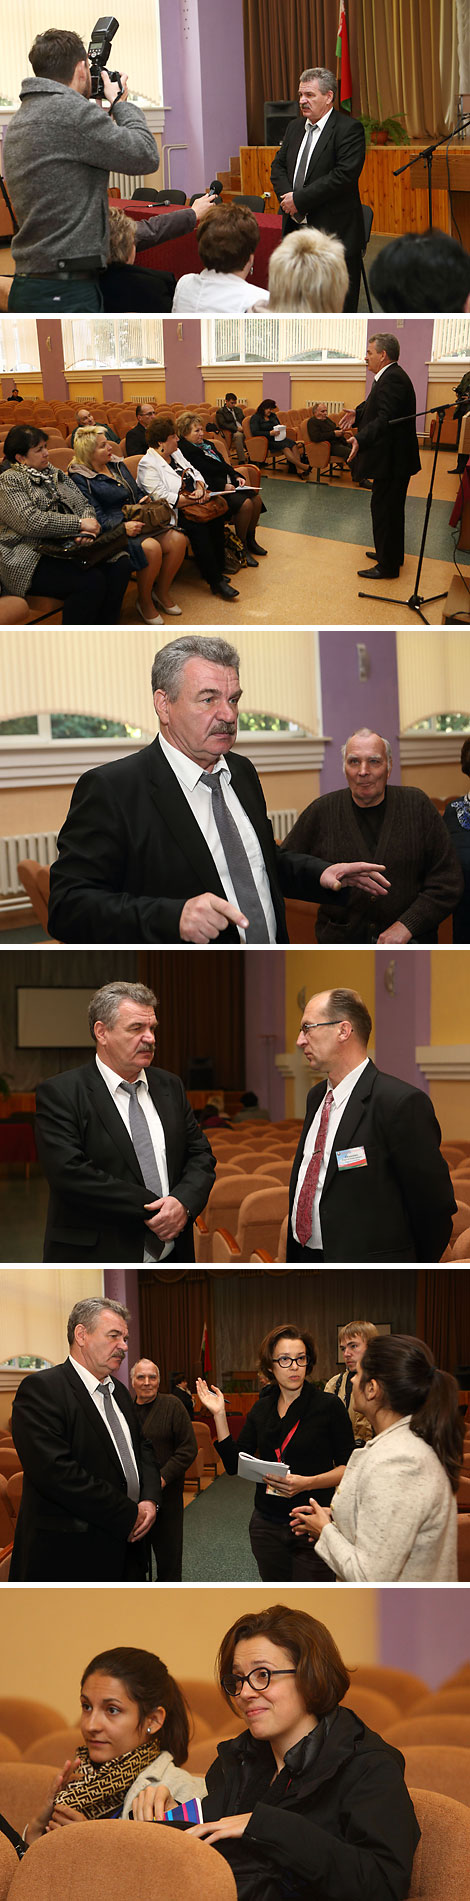 Nikolai Ulakhovich meets with voters in Grodno